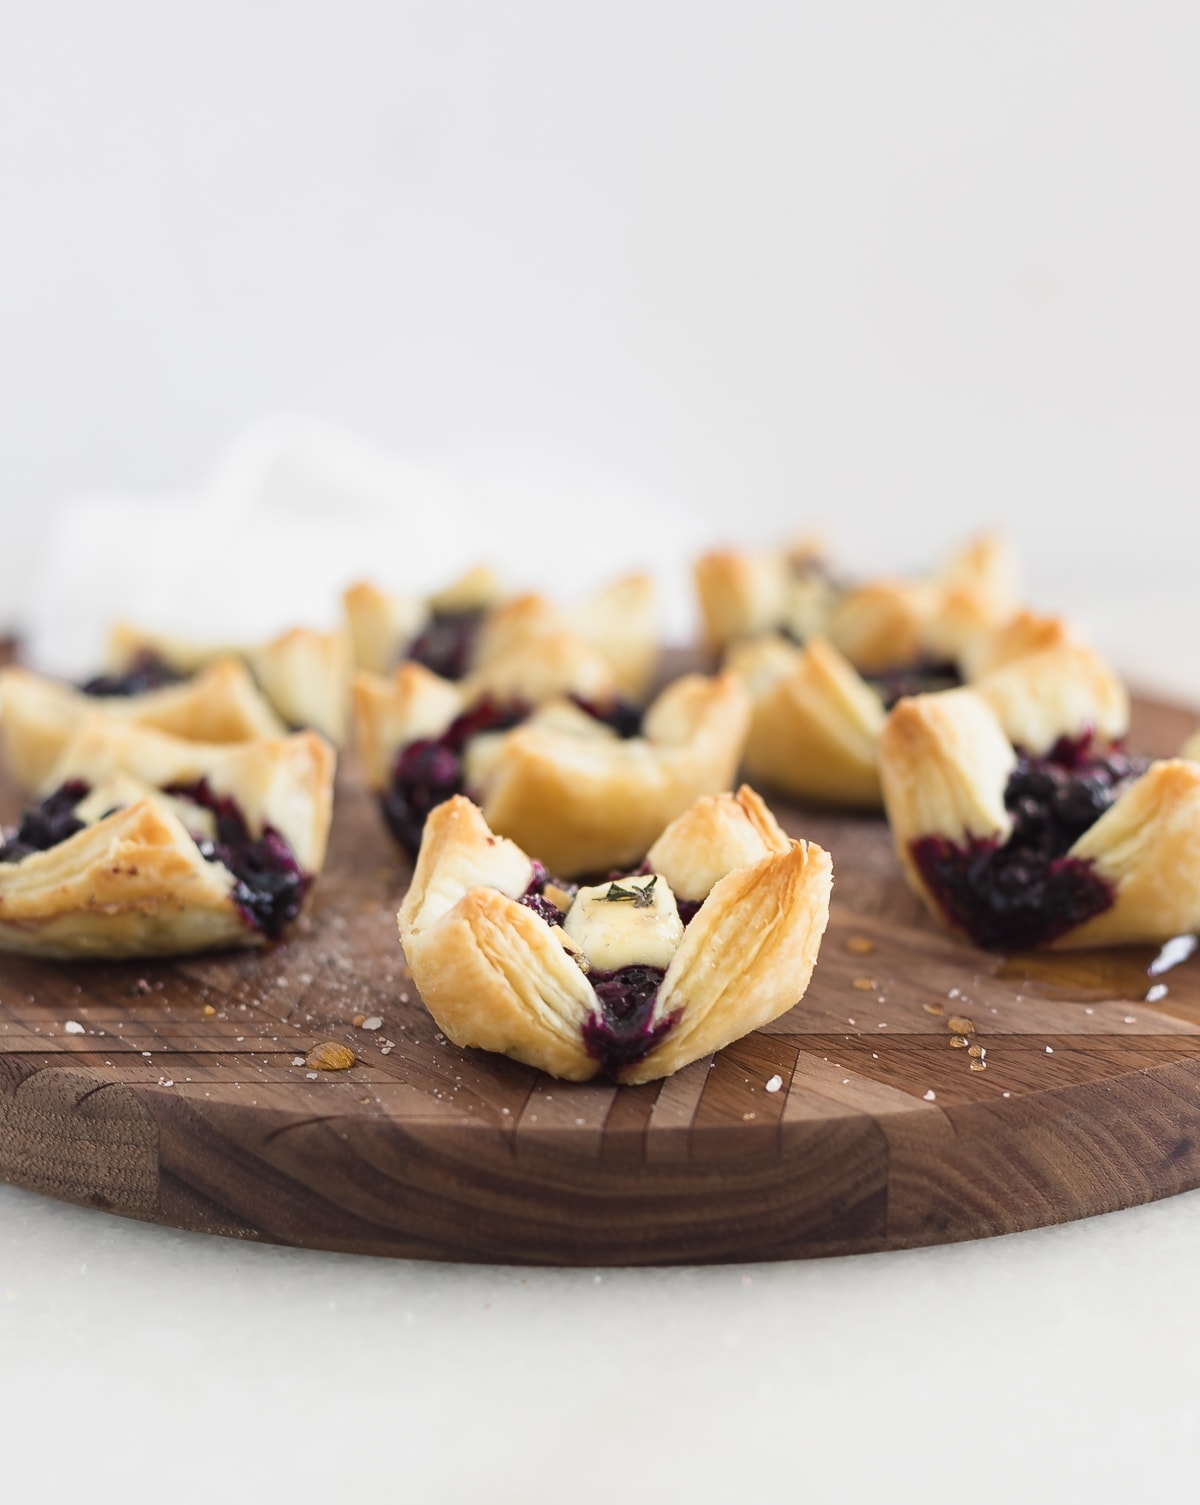 Wild Blueberry and Brie Puff Pastry Bites are the perfect appetizers for any holiday gathering. With only 5 ingredients and filled with gooey brie and wild blueberries, they're sure to please all of your guests this Thanksgiving or Christmas! (vegetarian)| sponsored by Wild Blueberries | via livelytable.com